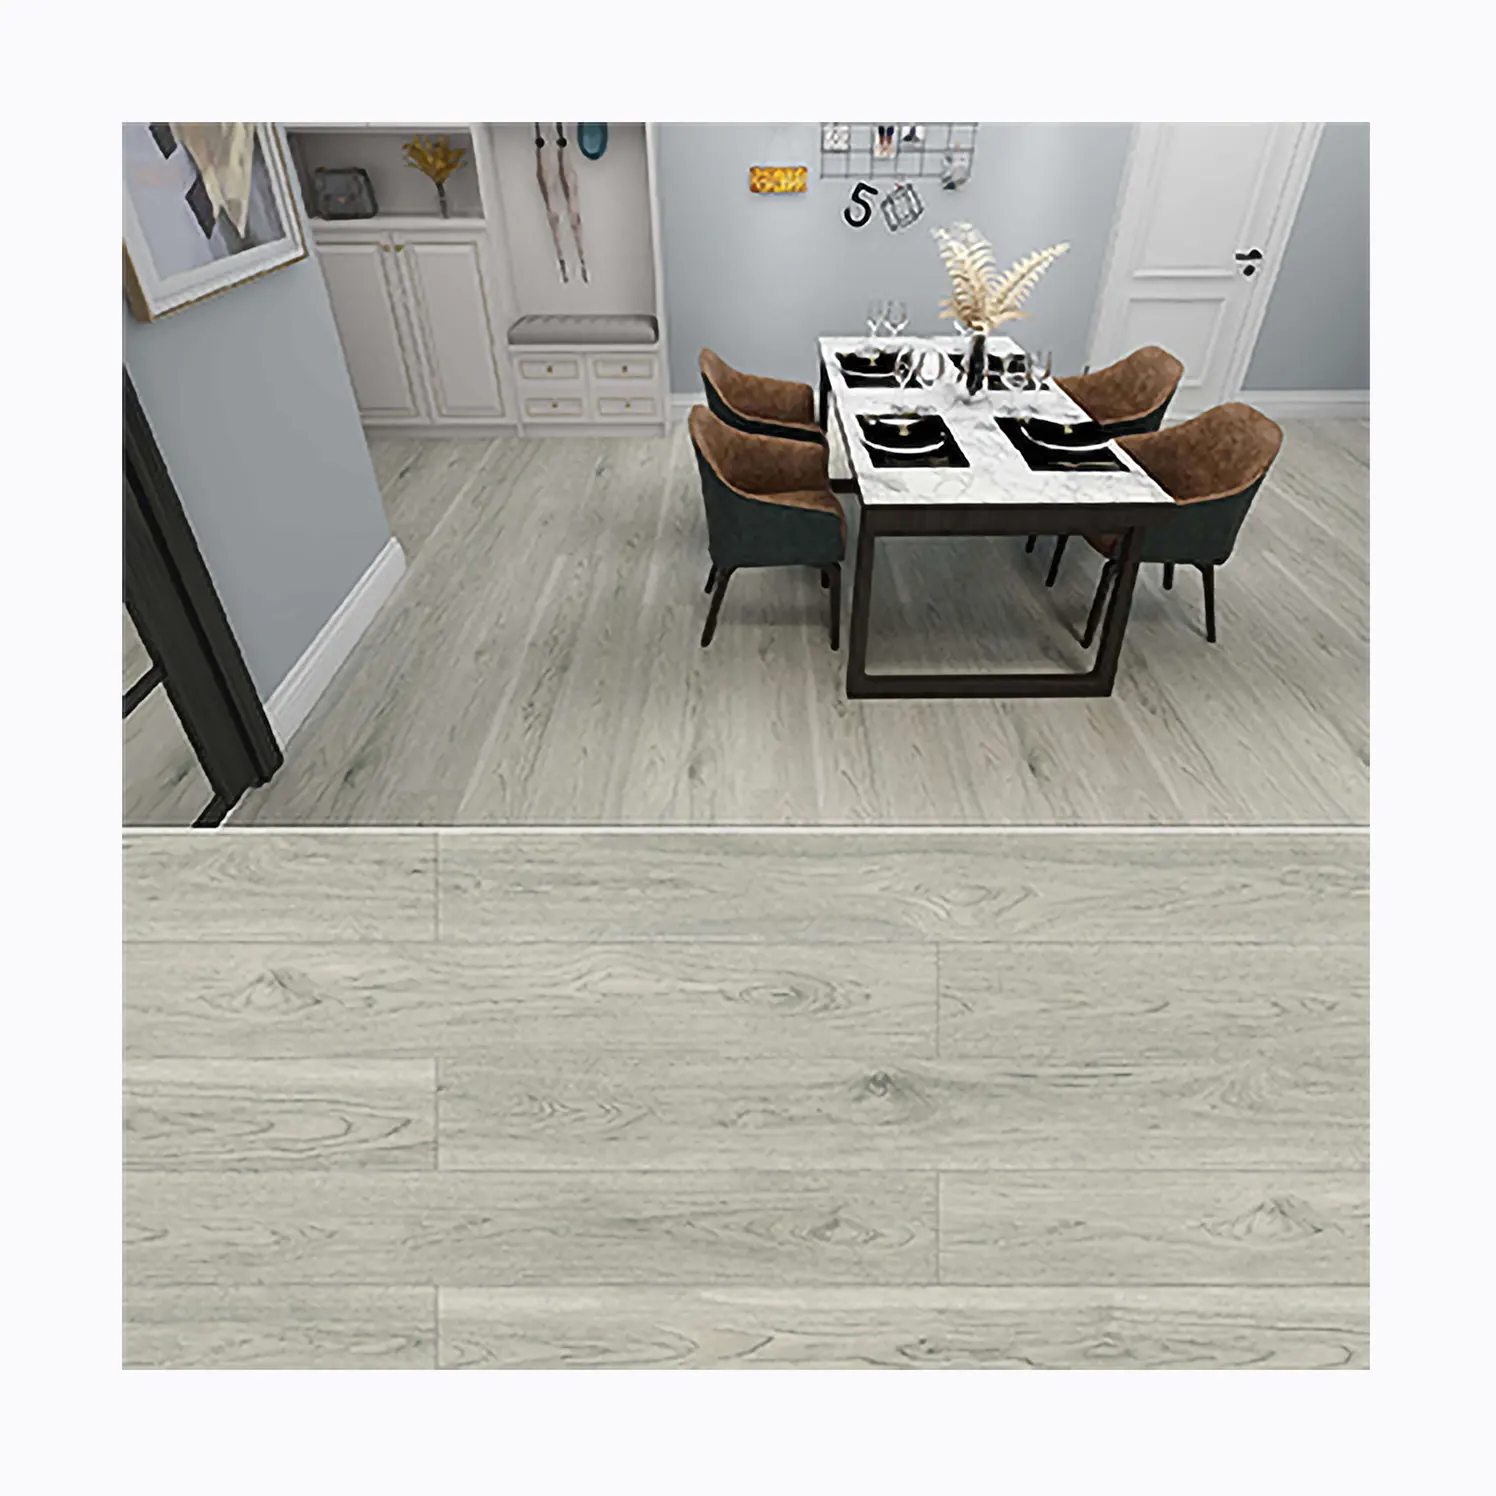 Black and White Timber Look b q Wood Texture Plastic Recycled Vinyl Flooring Tiles